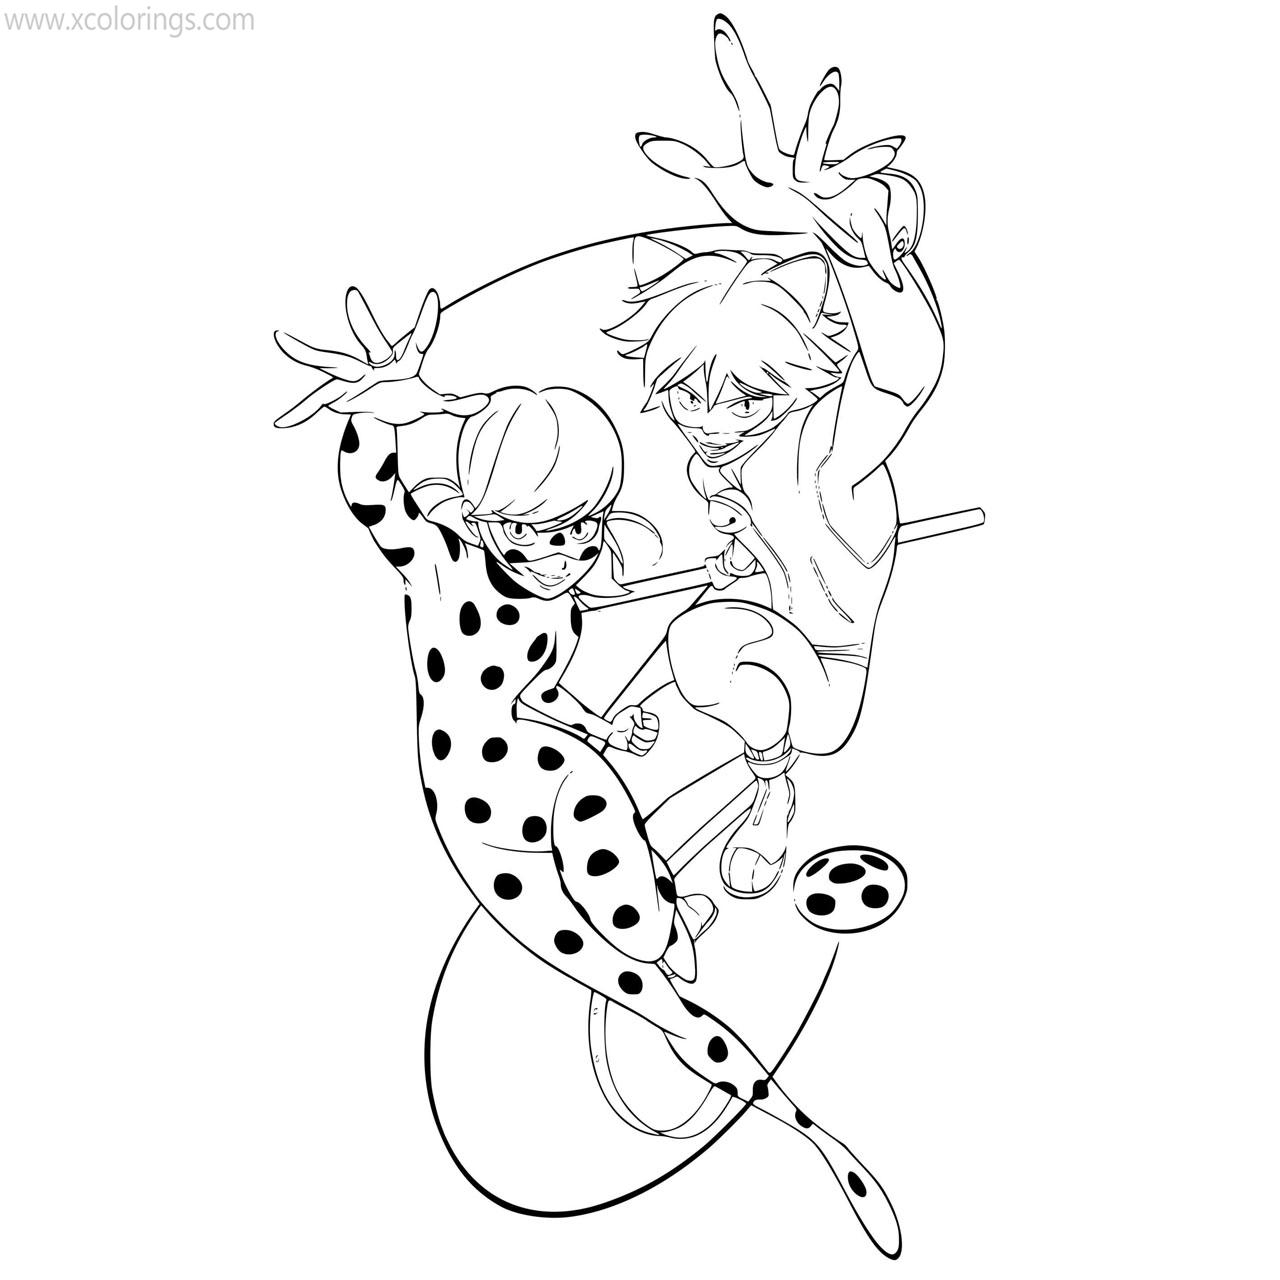 Miraculous Ladybug Coloring Pages Free To Print - Xcolorings encequiconcerne Coloriage Miraculous Papillon